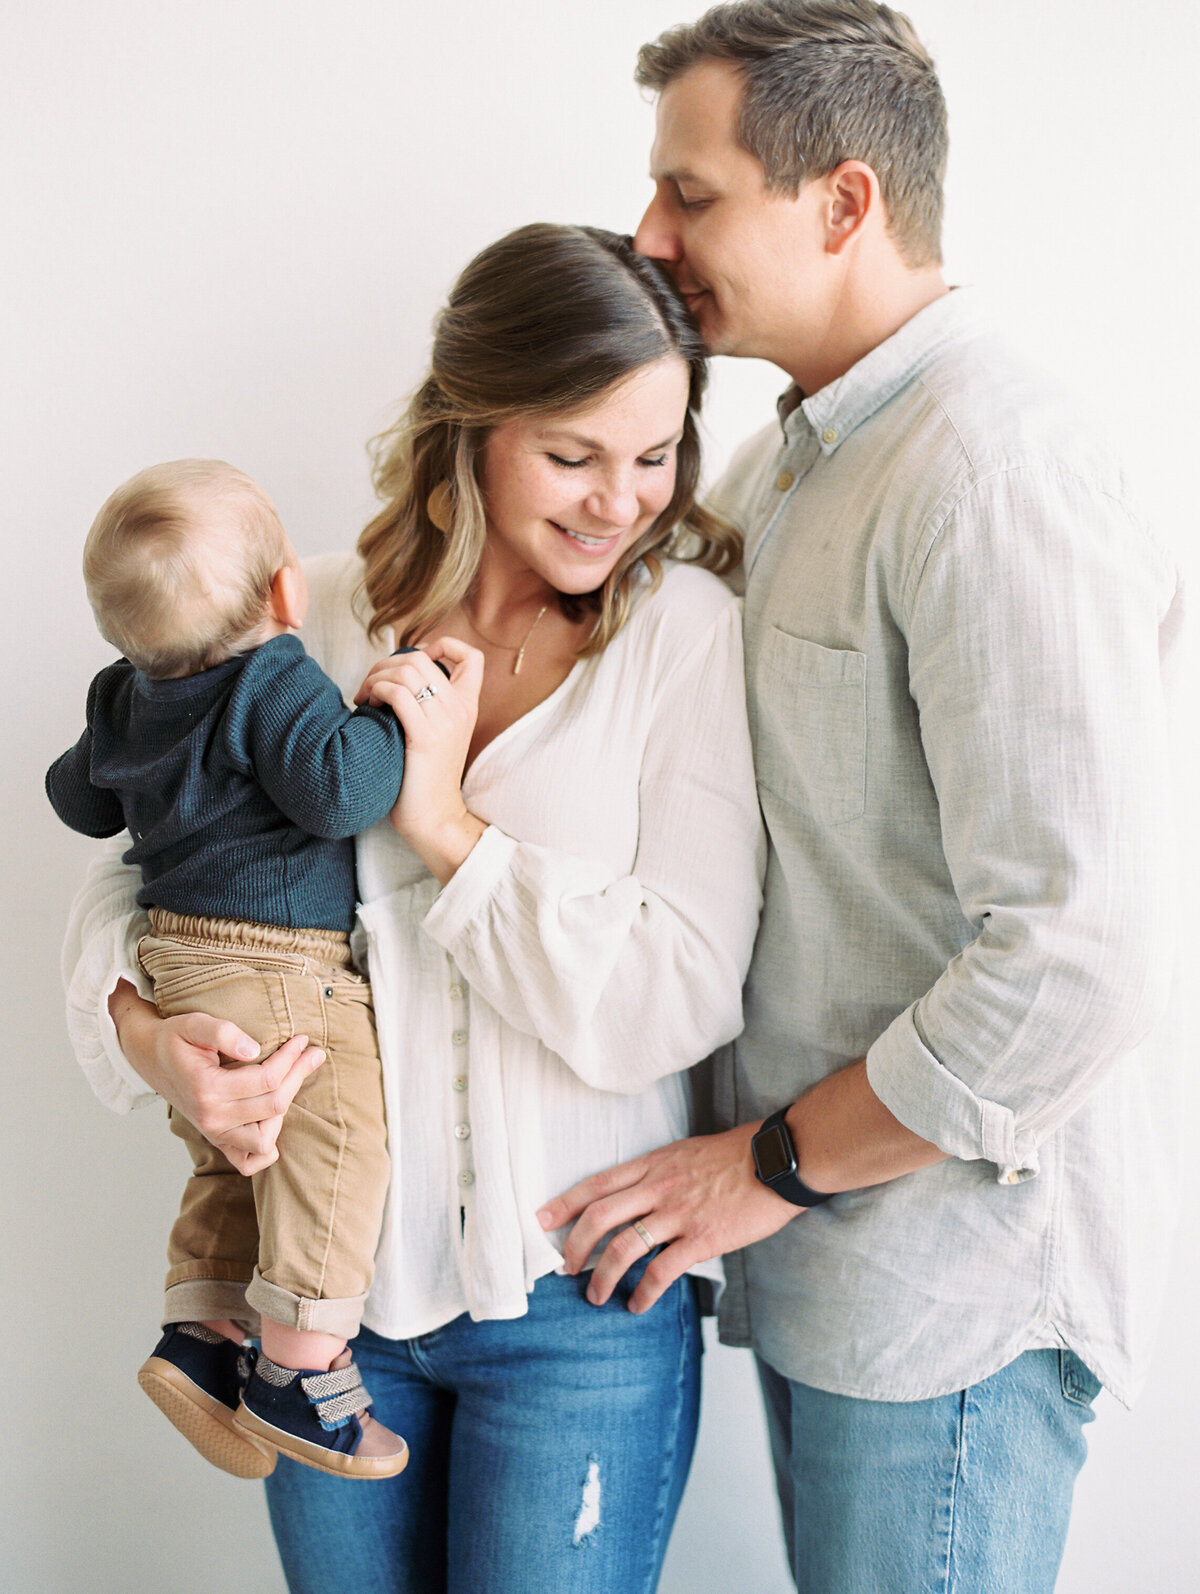 Studio portrait of a mom and dad and their baby on a white background